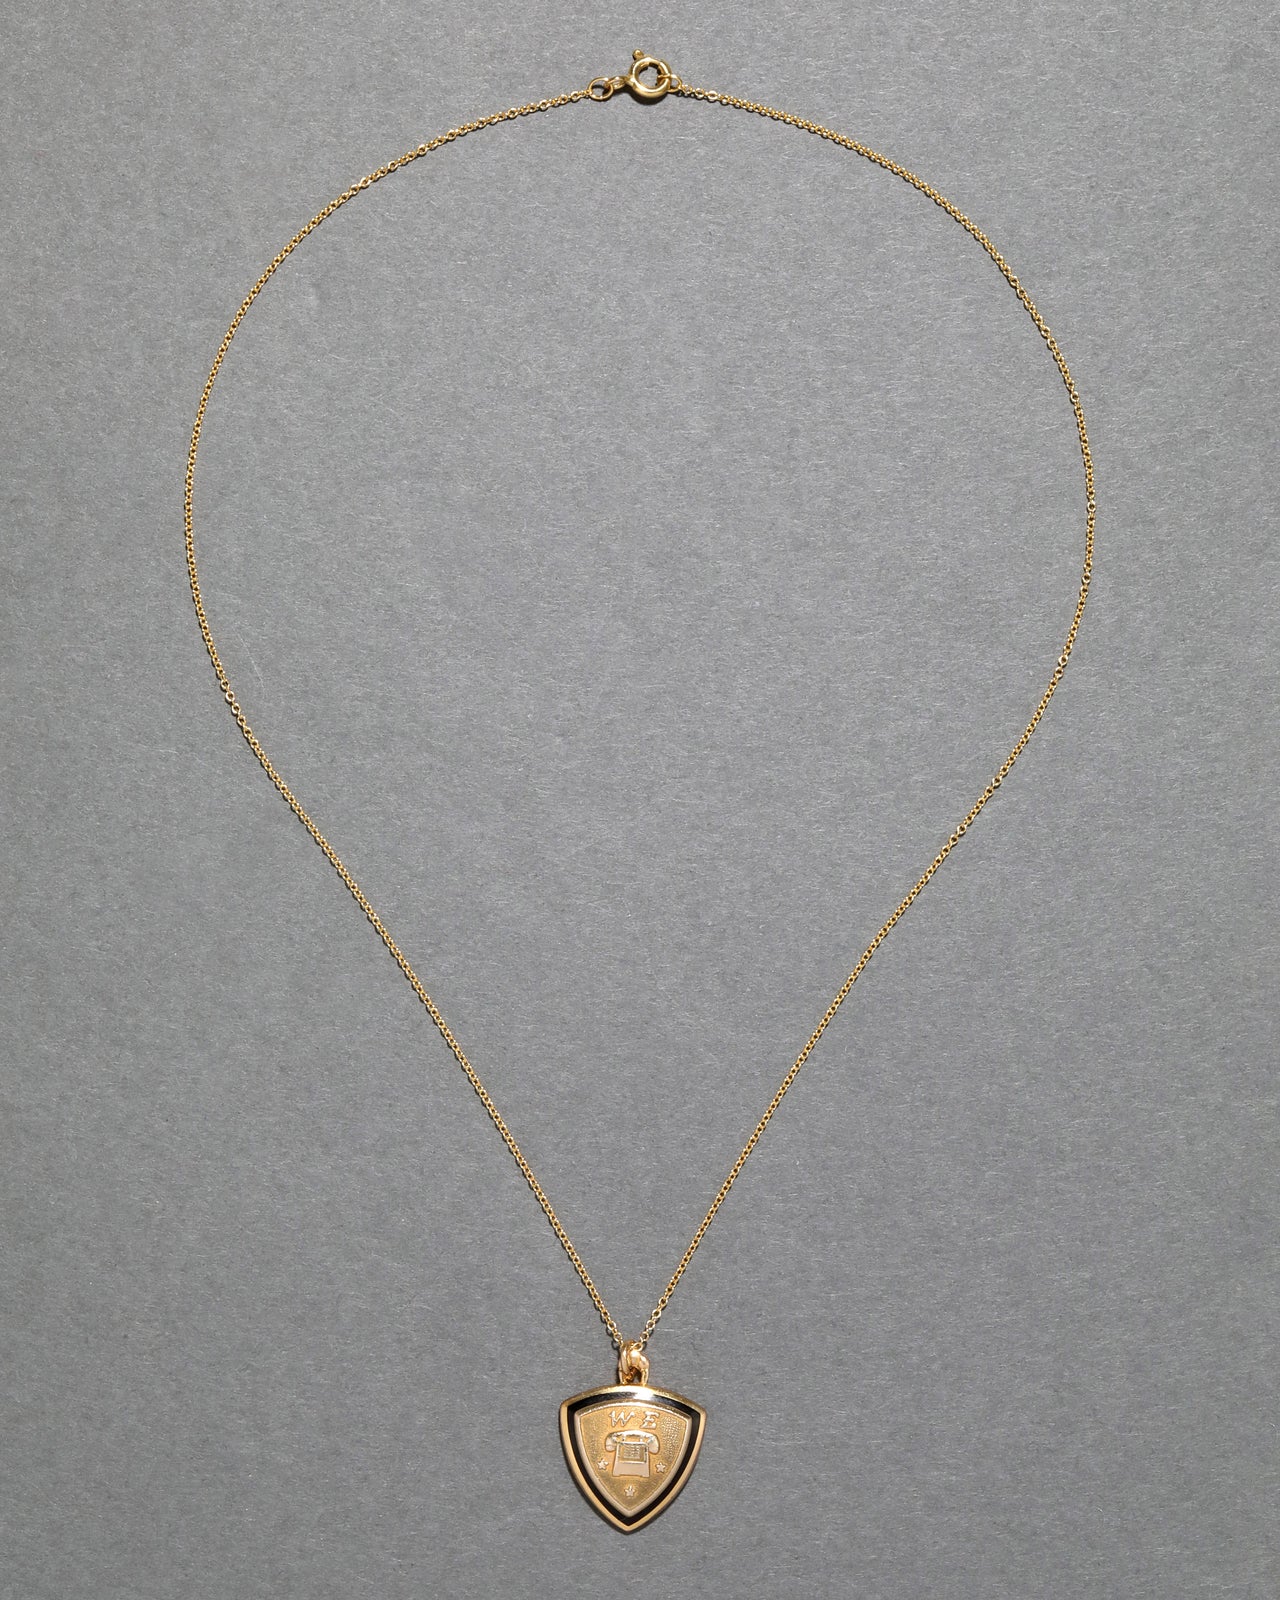 Vintage 1960s 10k Gold Fill Western Electric Telephone Pendant Necklace - Photo 2